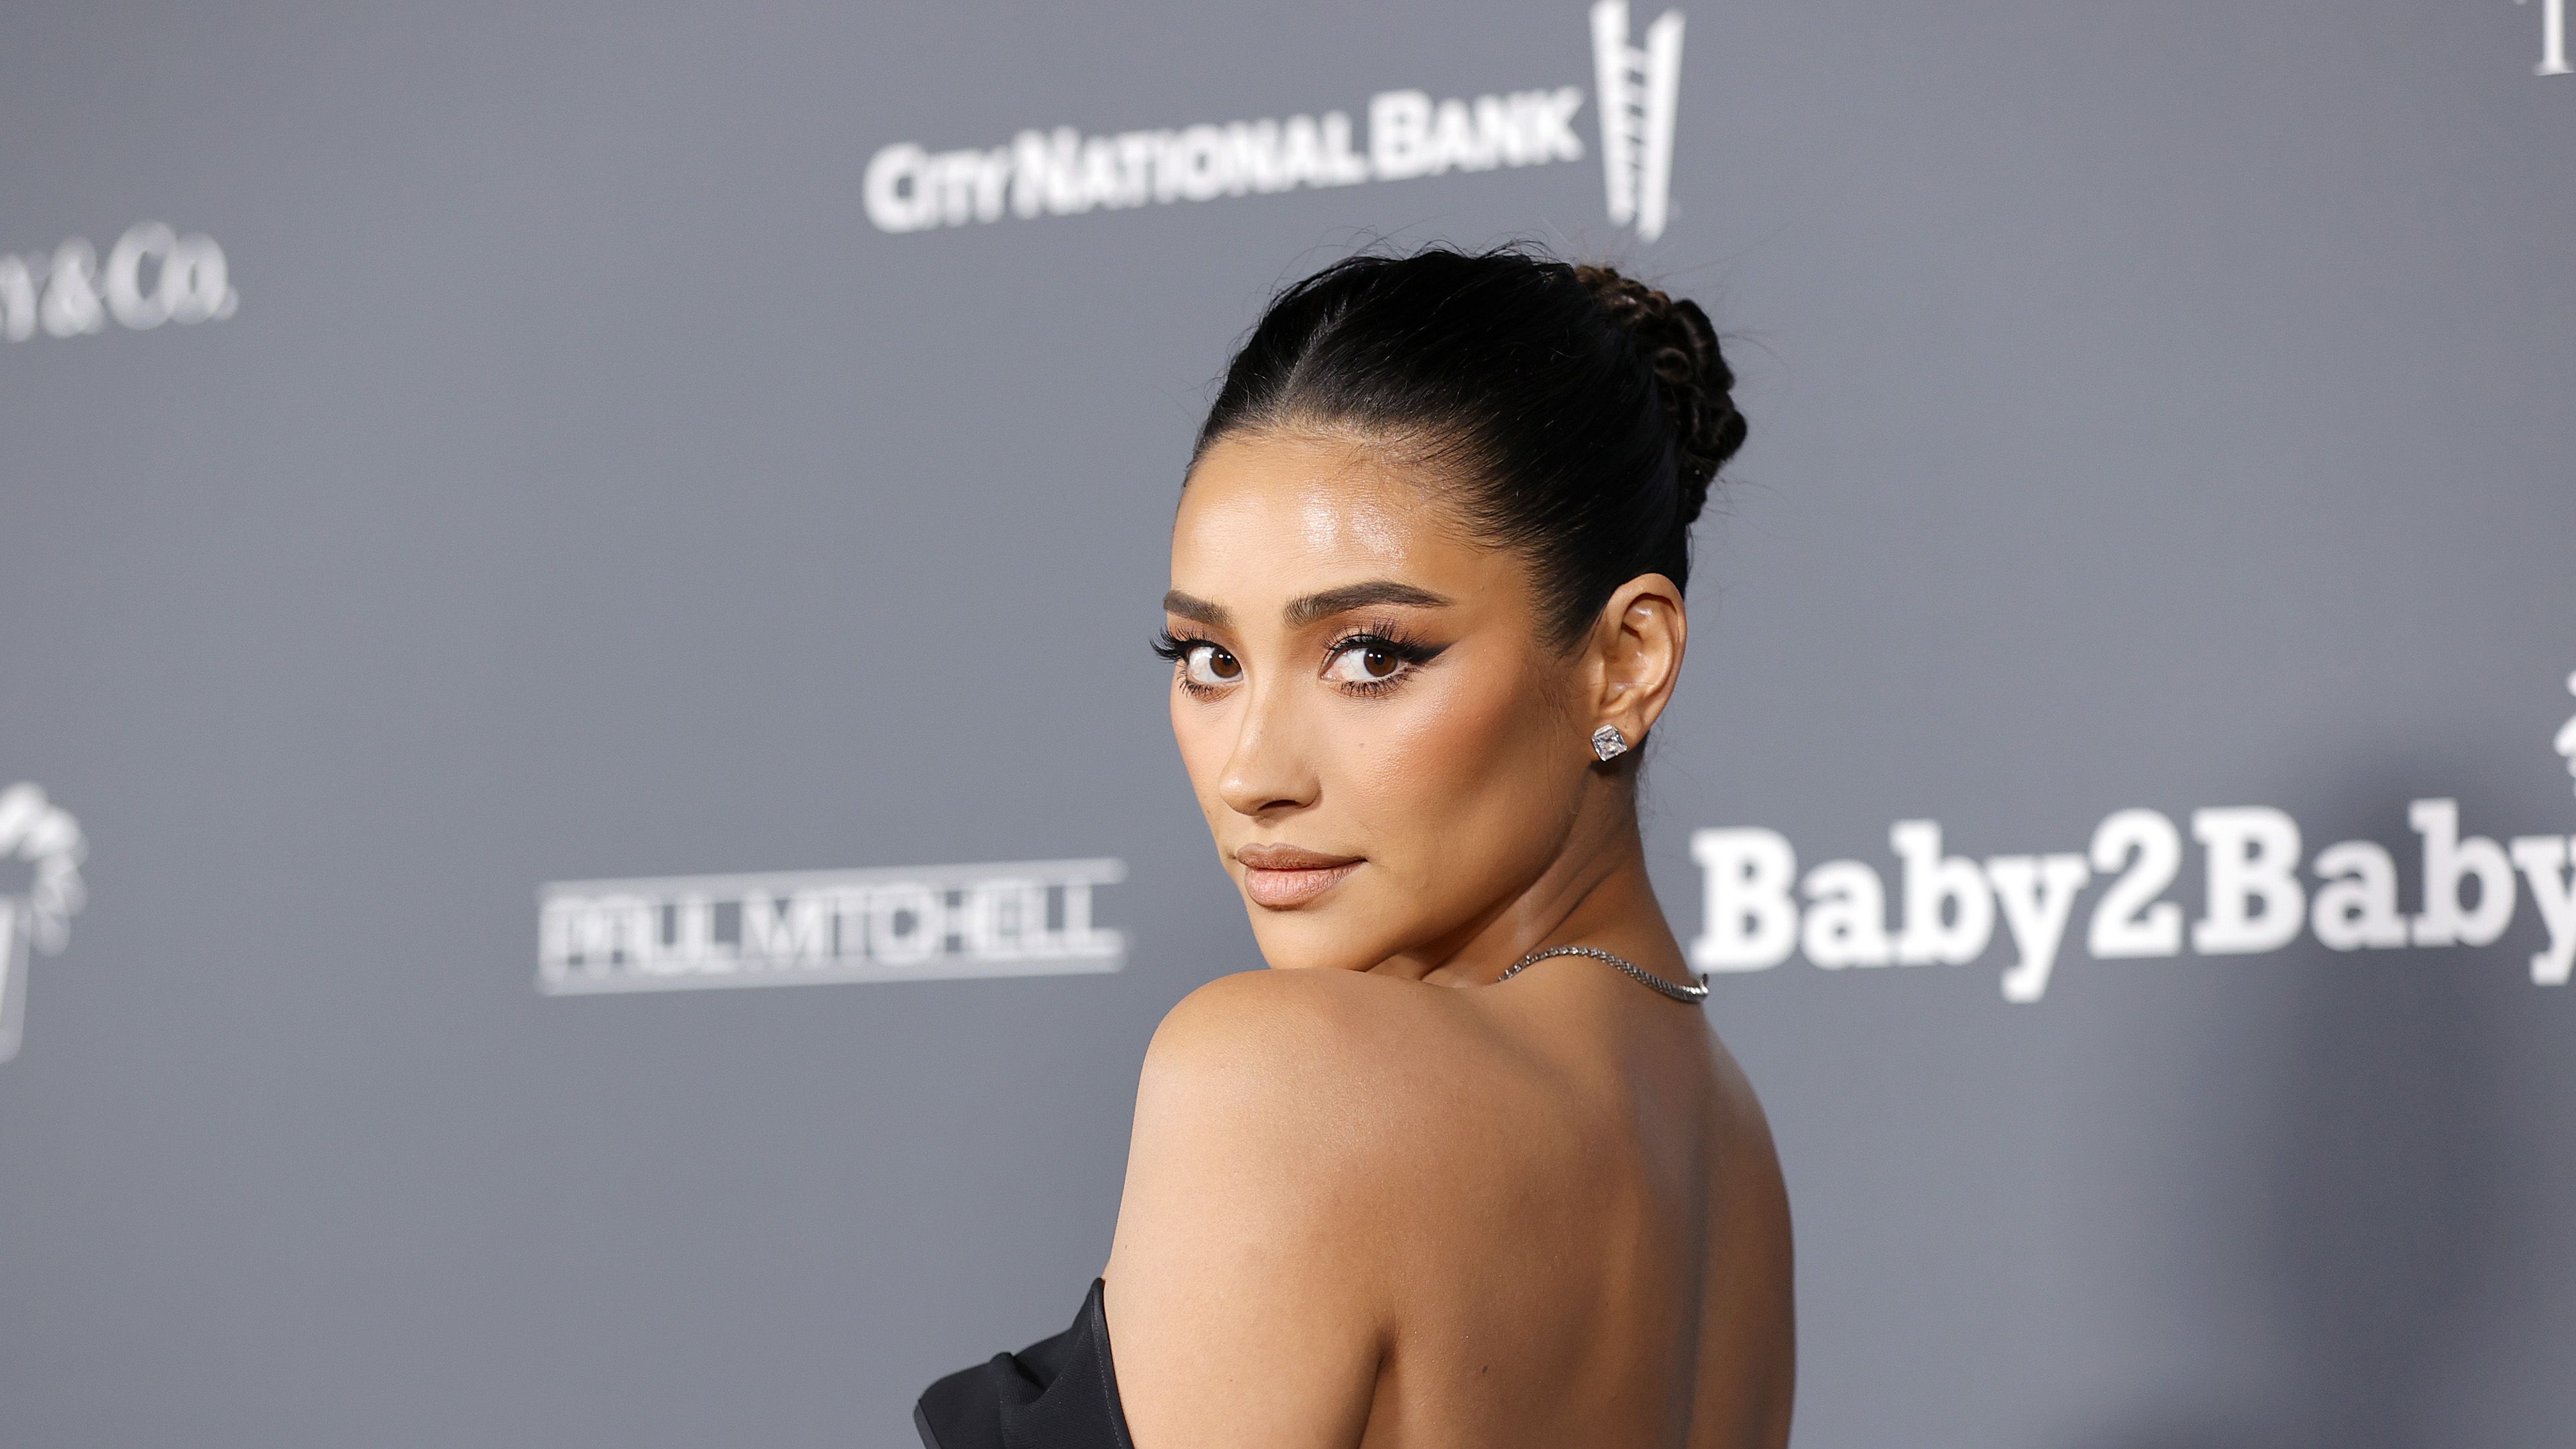 dino rigas recommends shay mitchell nudes pic